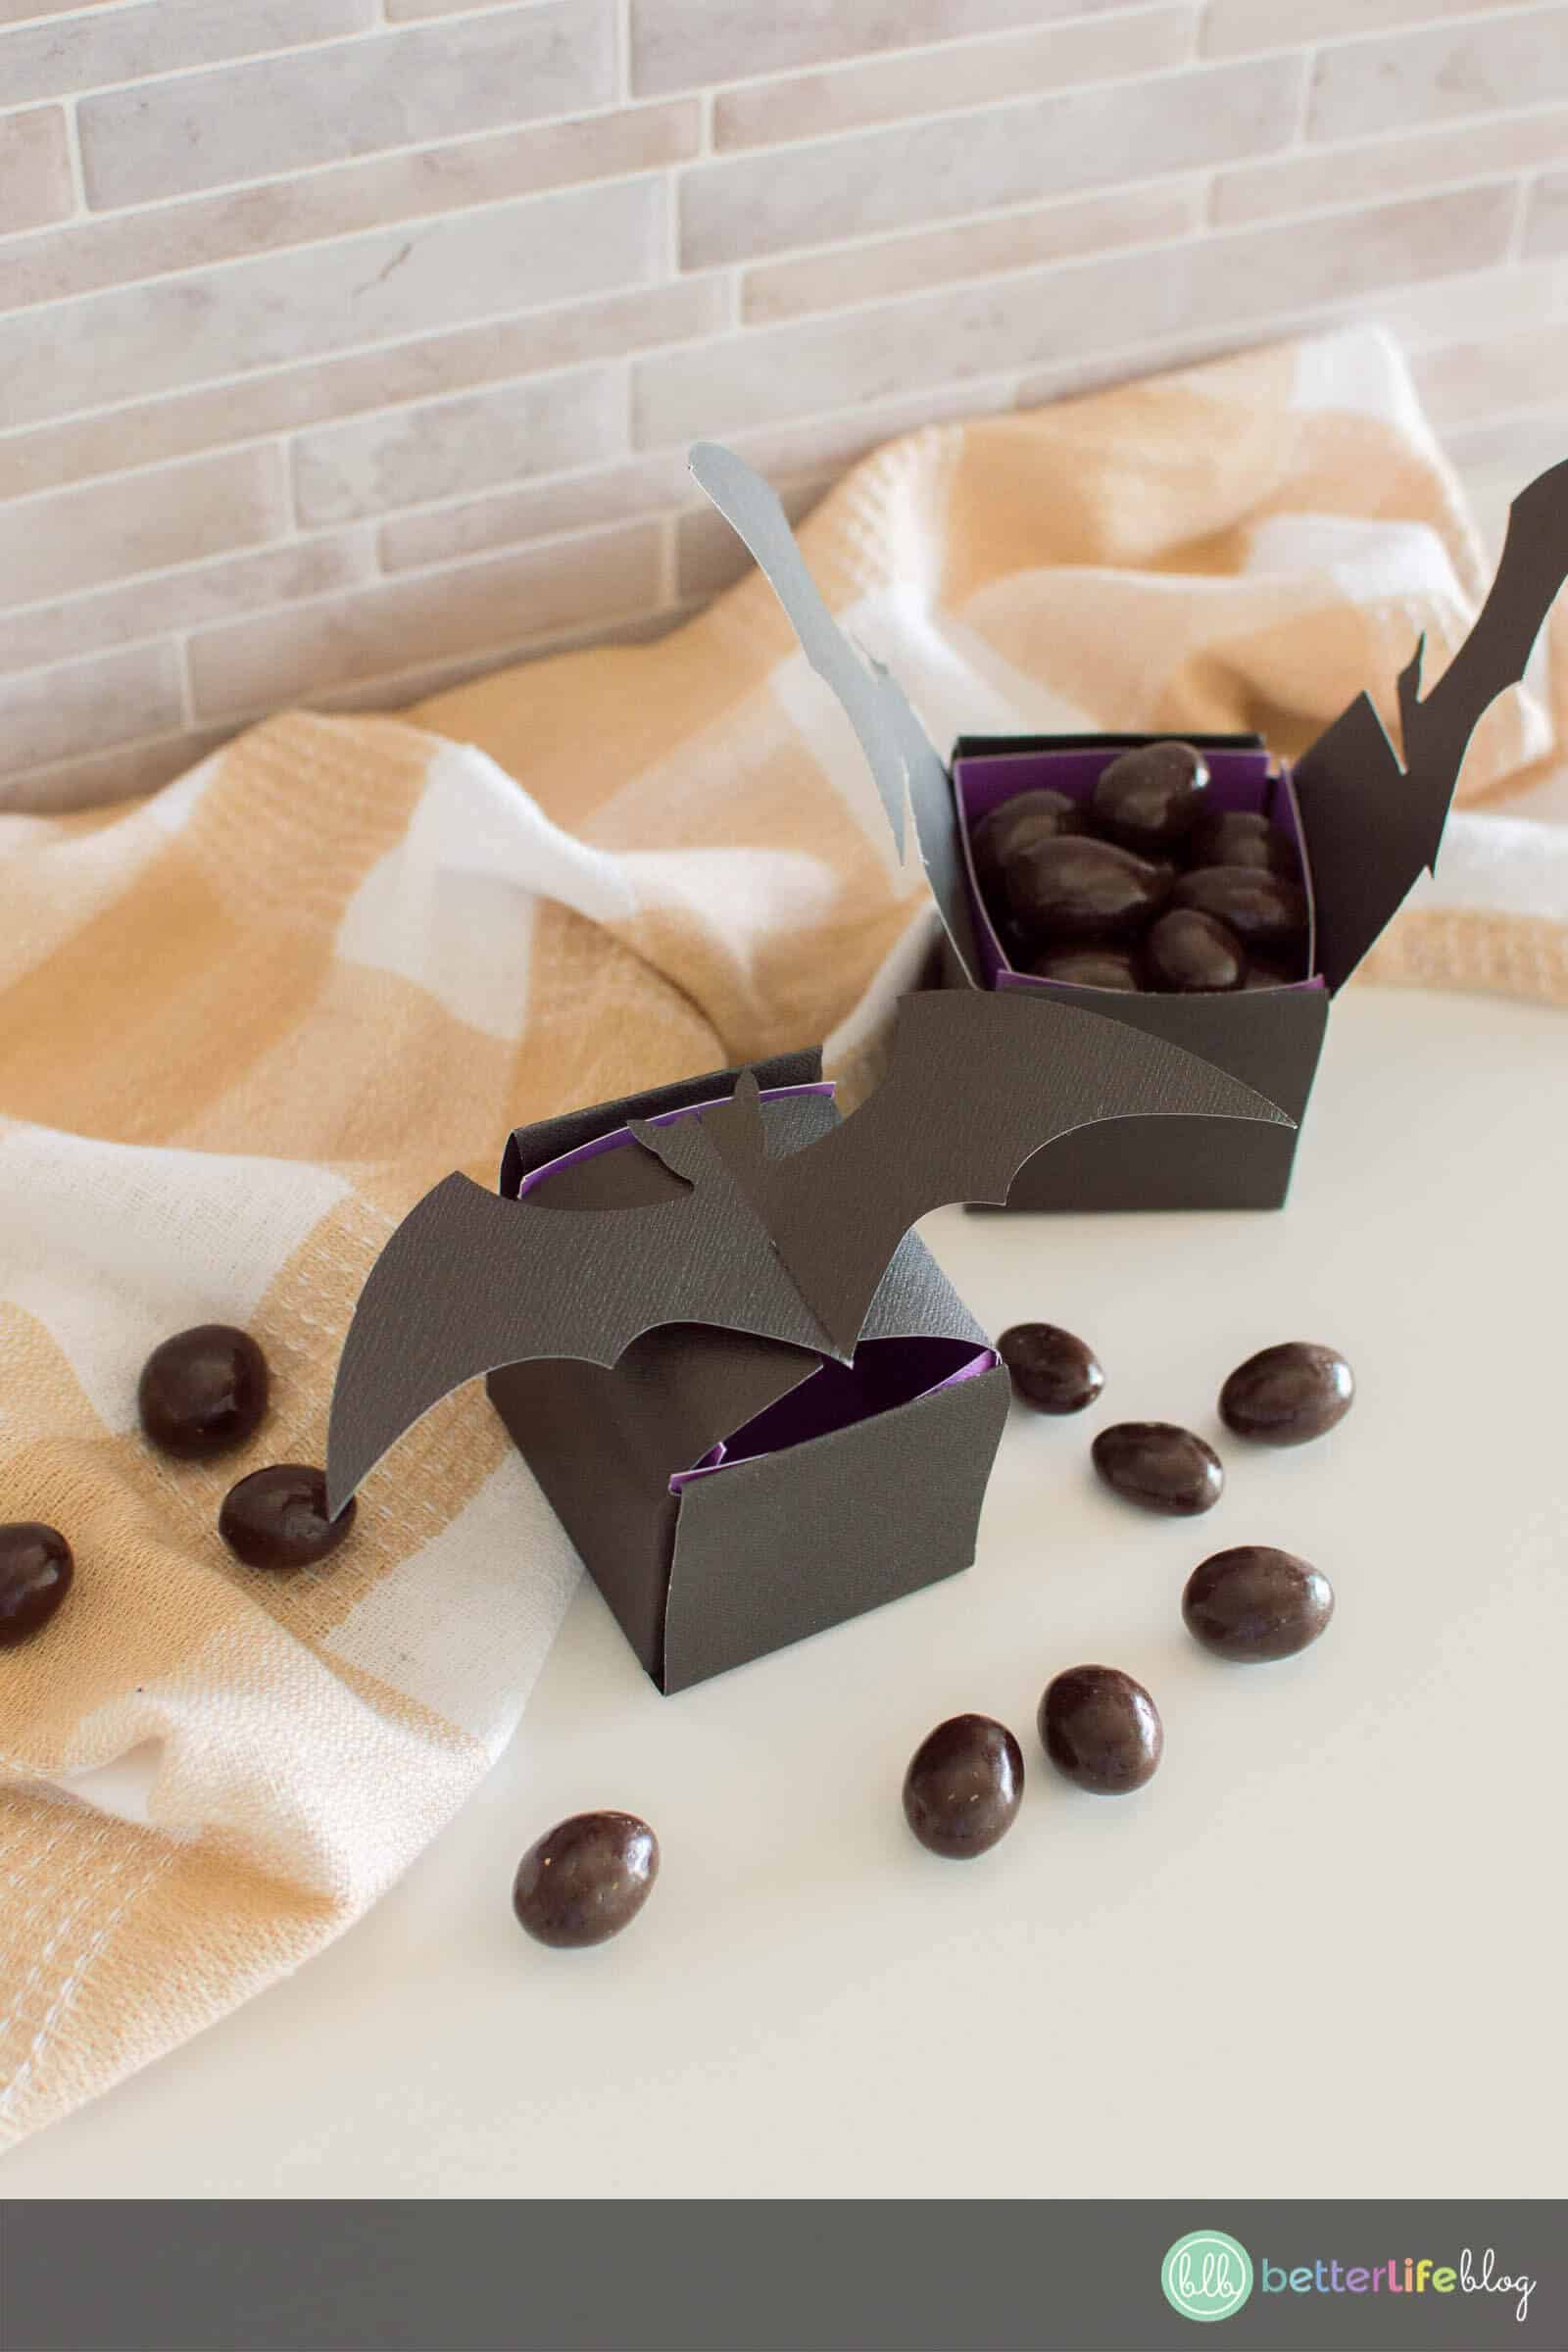 Halloween Bat Treat Box filled with chocolate-covered almonds and surrounded by a plaid napkin